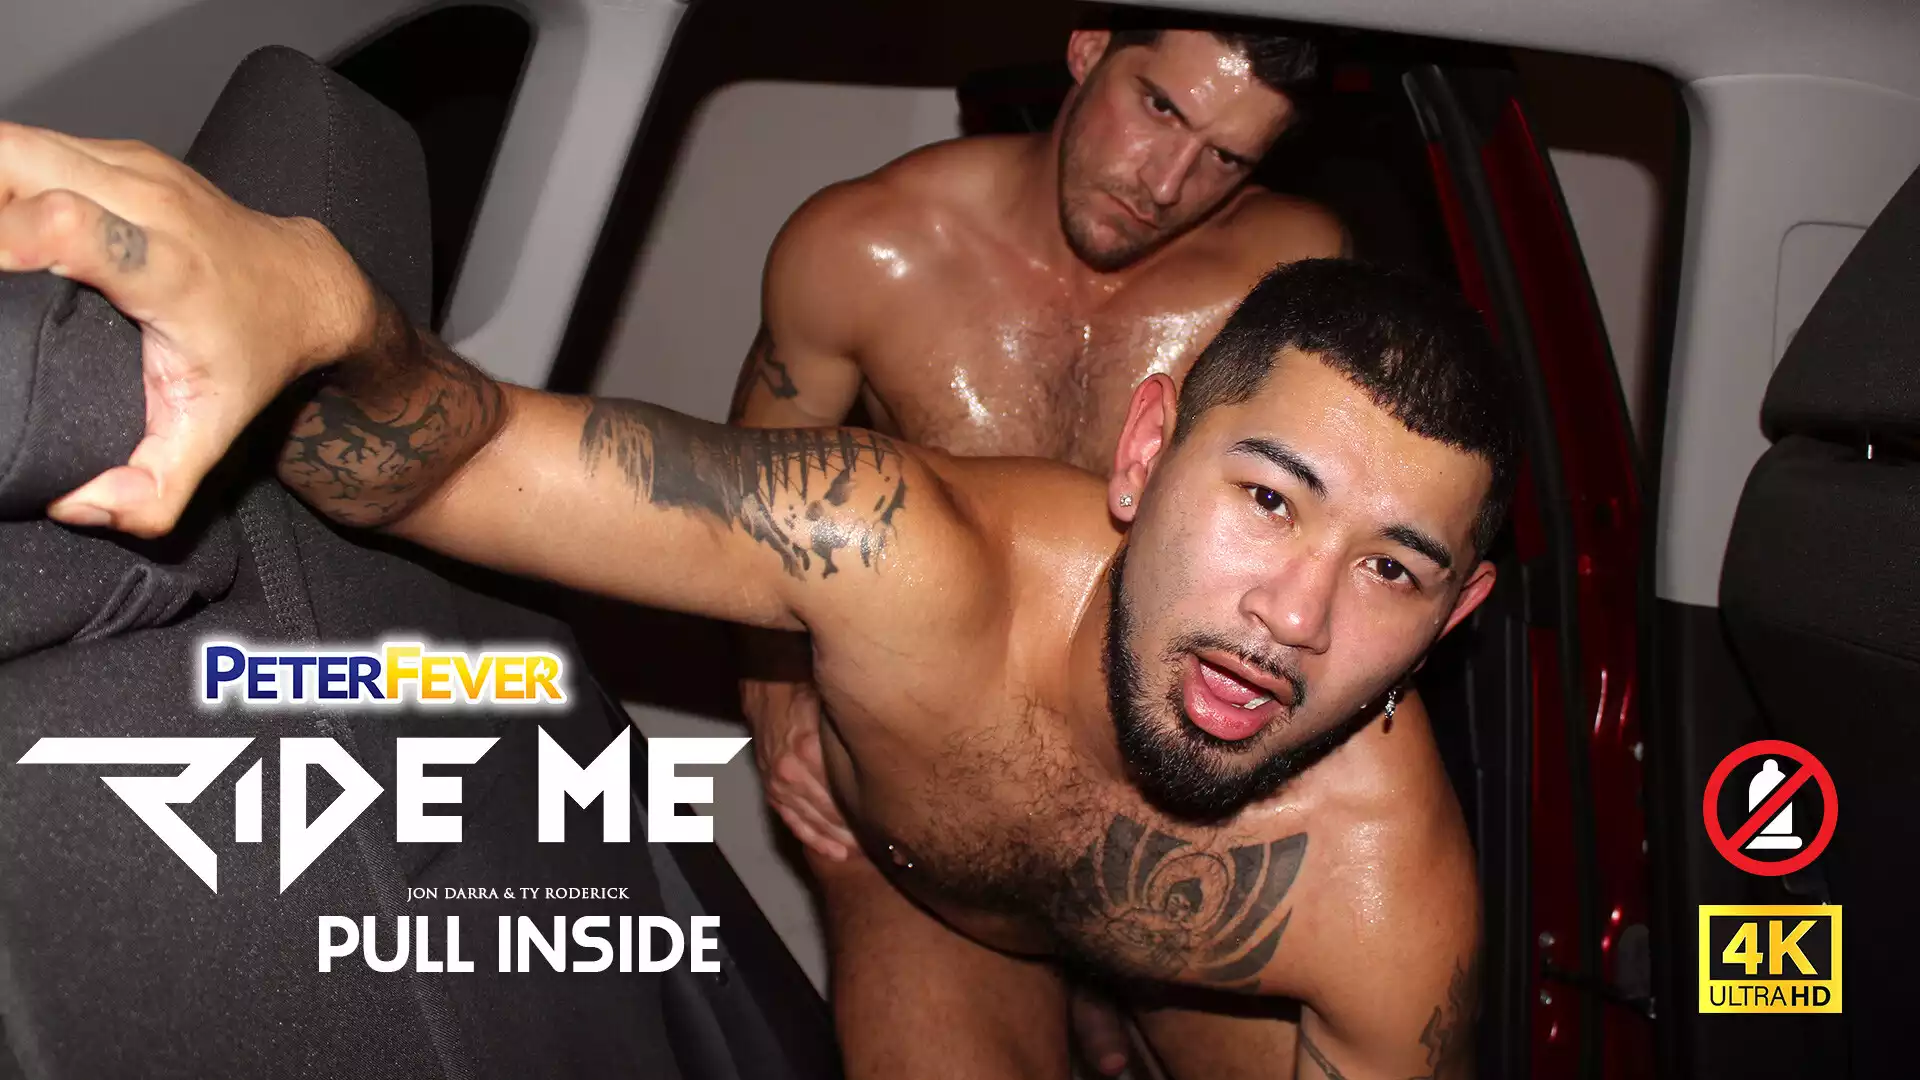 PeterFever – Ride Me 1, Pull Inside – Ty Roderick and Jon Darra